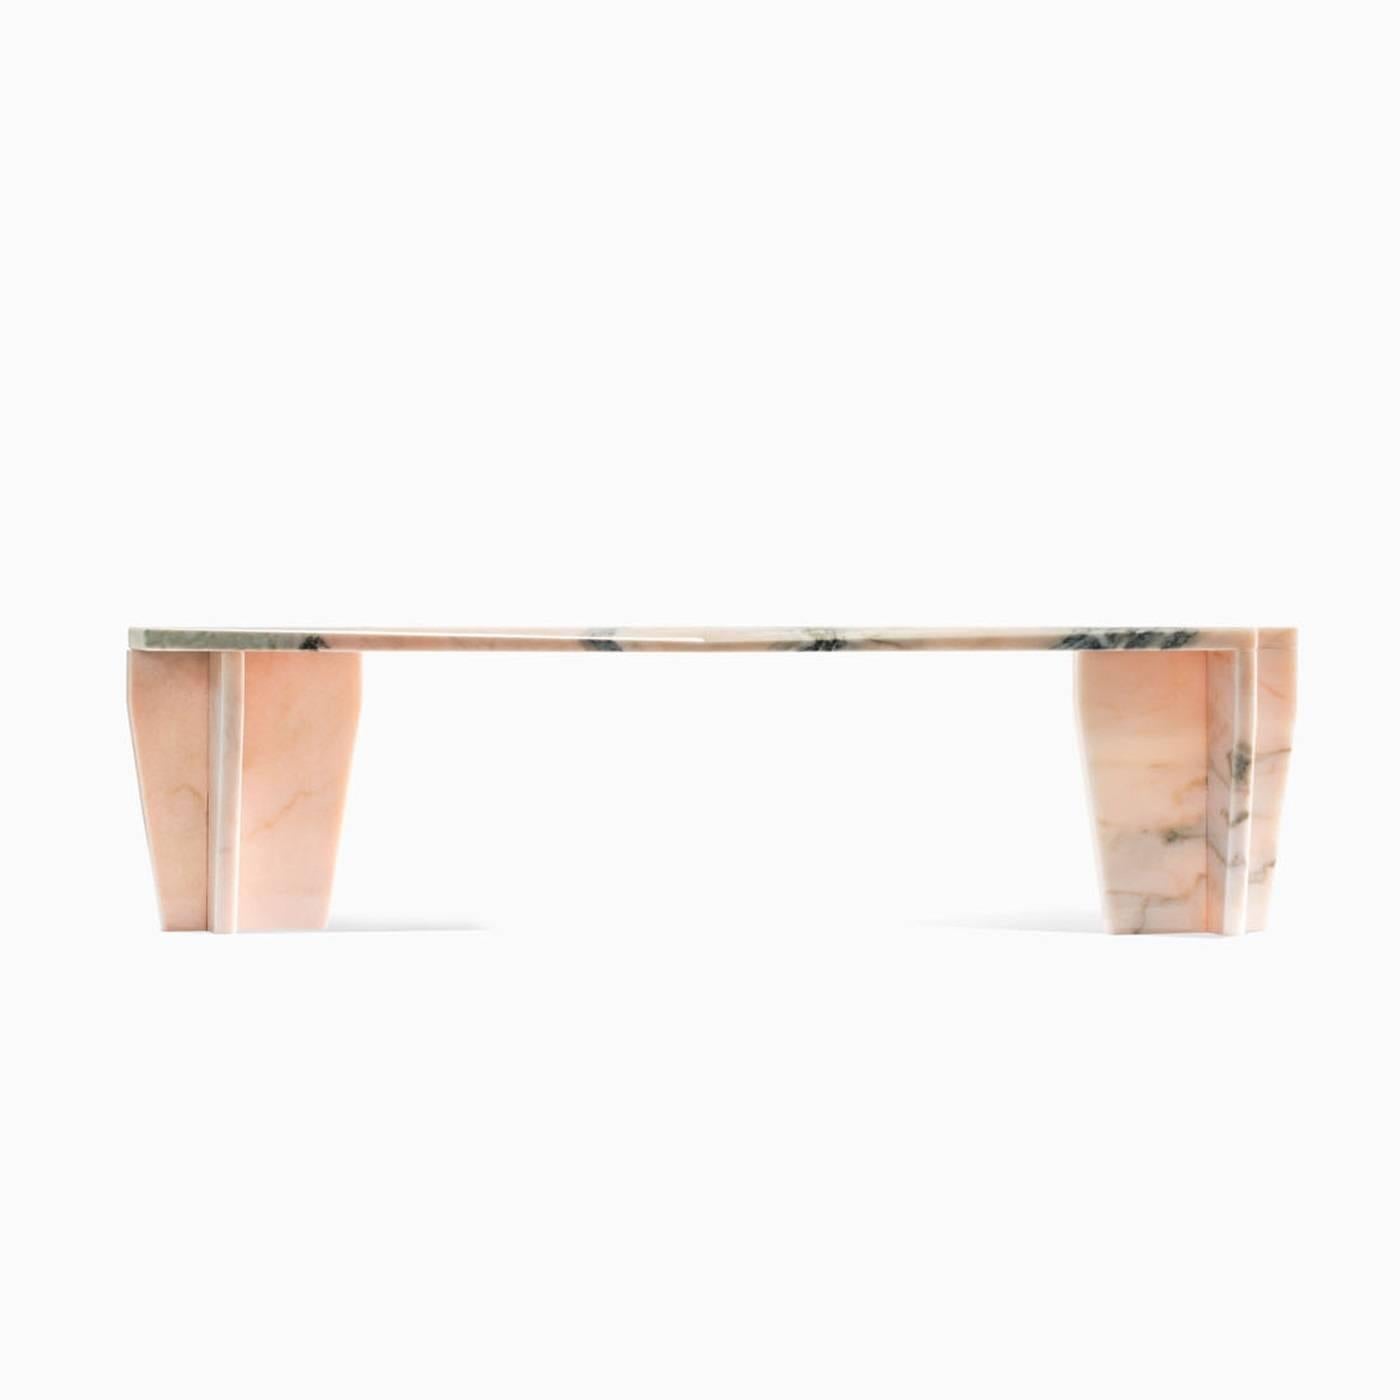 This coffee table features two short legs and it is entirely made of 2 cm. thick pink Portugal marble. Part of the Z-series, this table uses a special dry joint without any glue or screws. It is possible to have different kinds of marbles upon